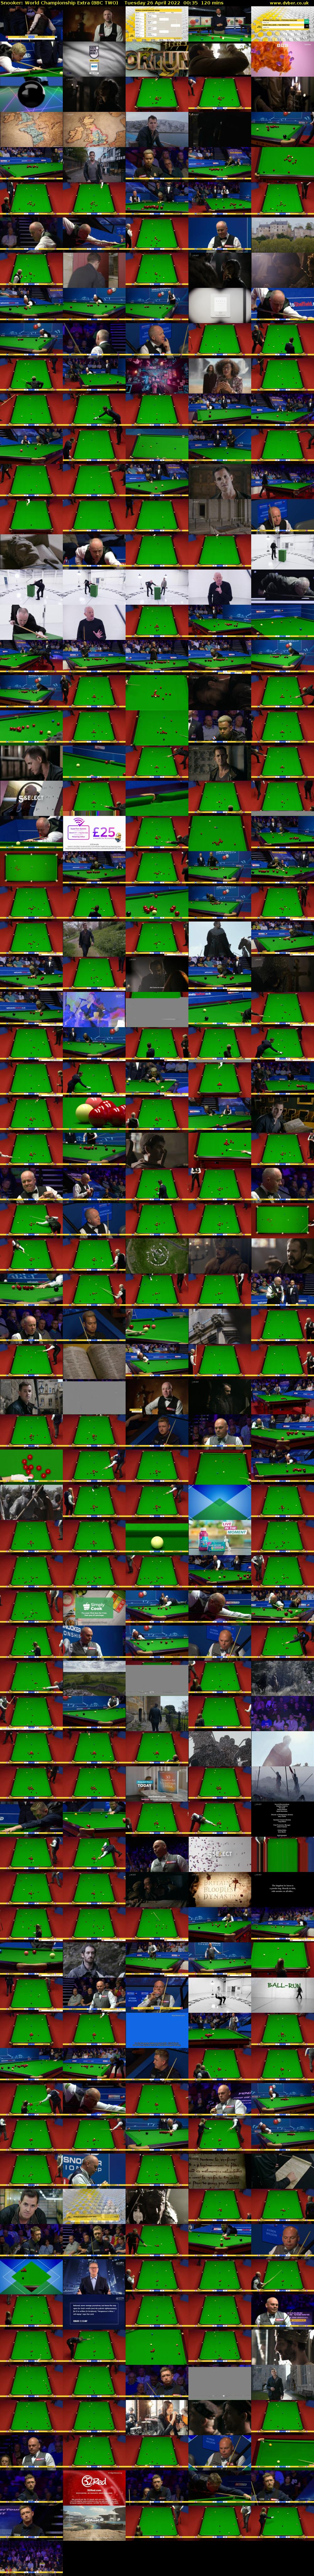 Snooker: World Championship Extra (BBC TWO) Tuesday 26 April 2022 00:35 - 02:35